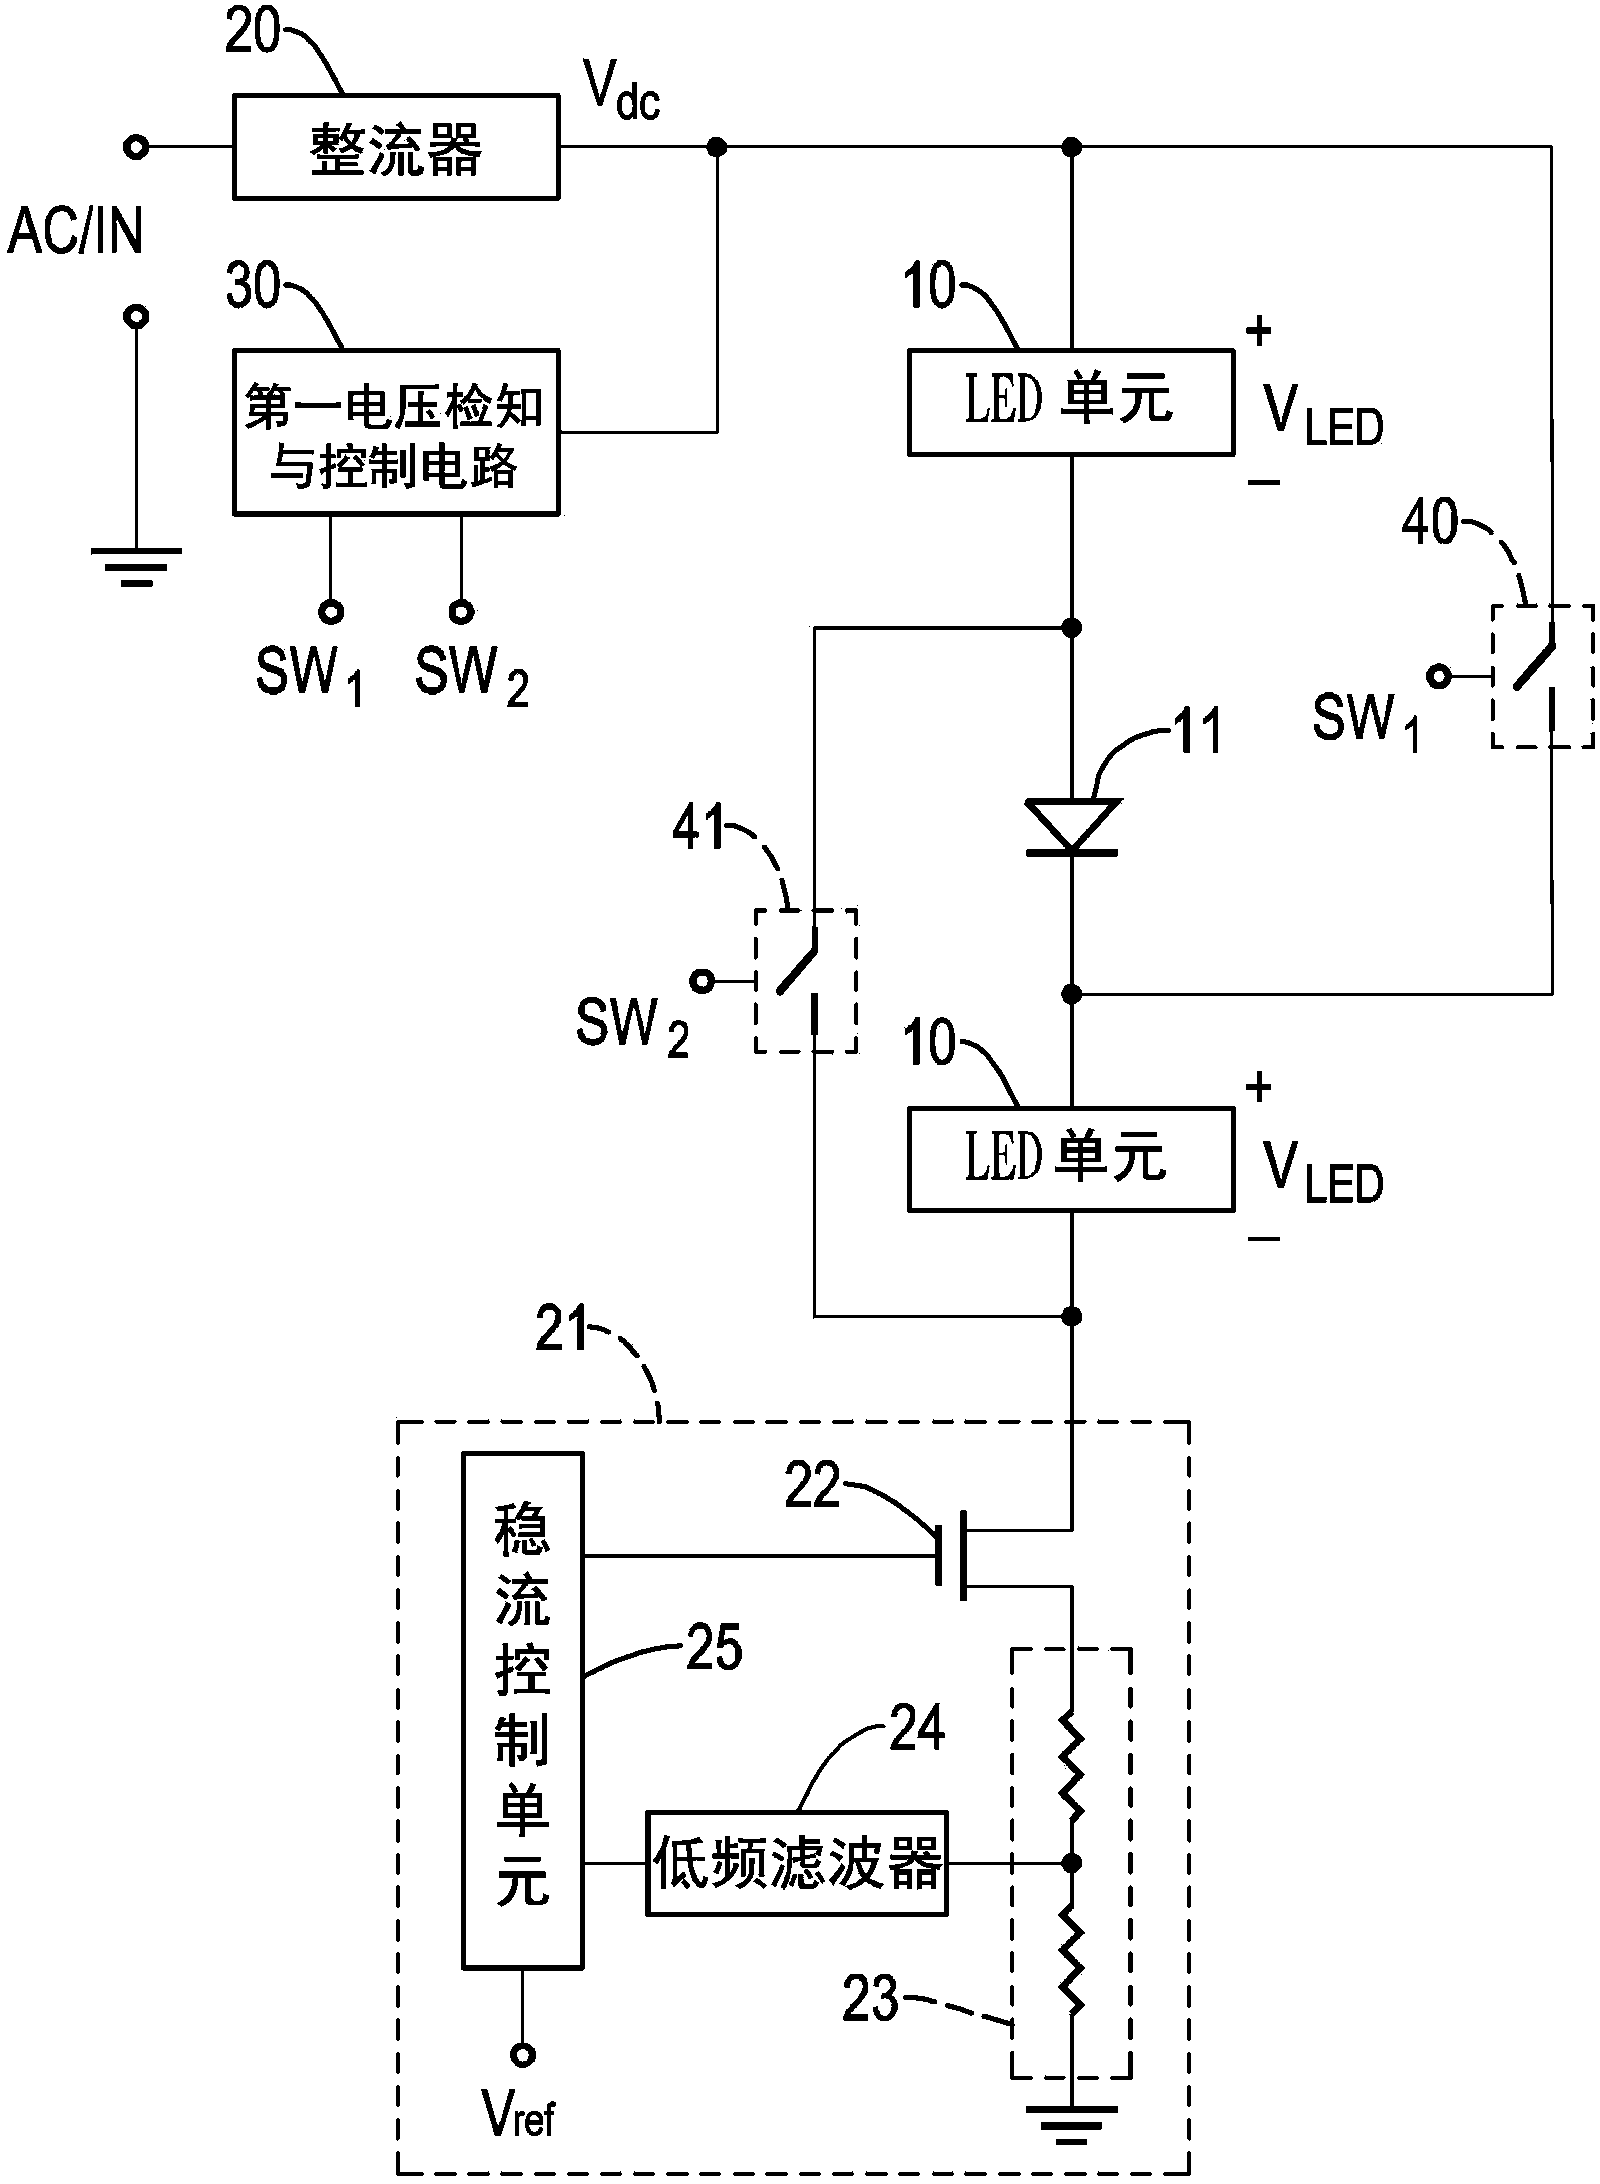 Full-voltage serial-parallel led lamp